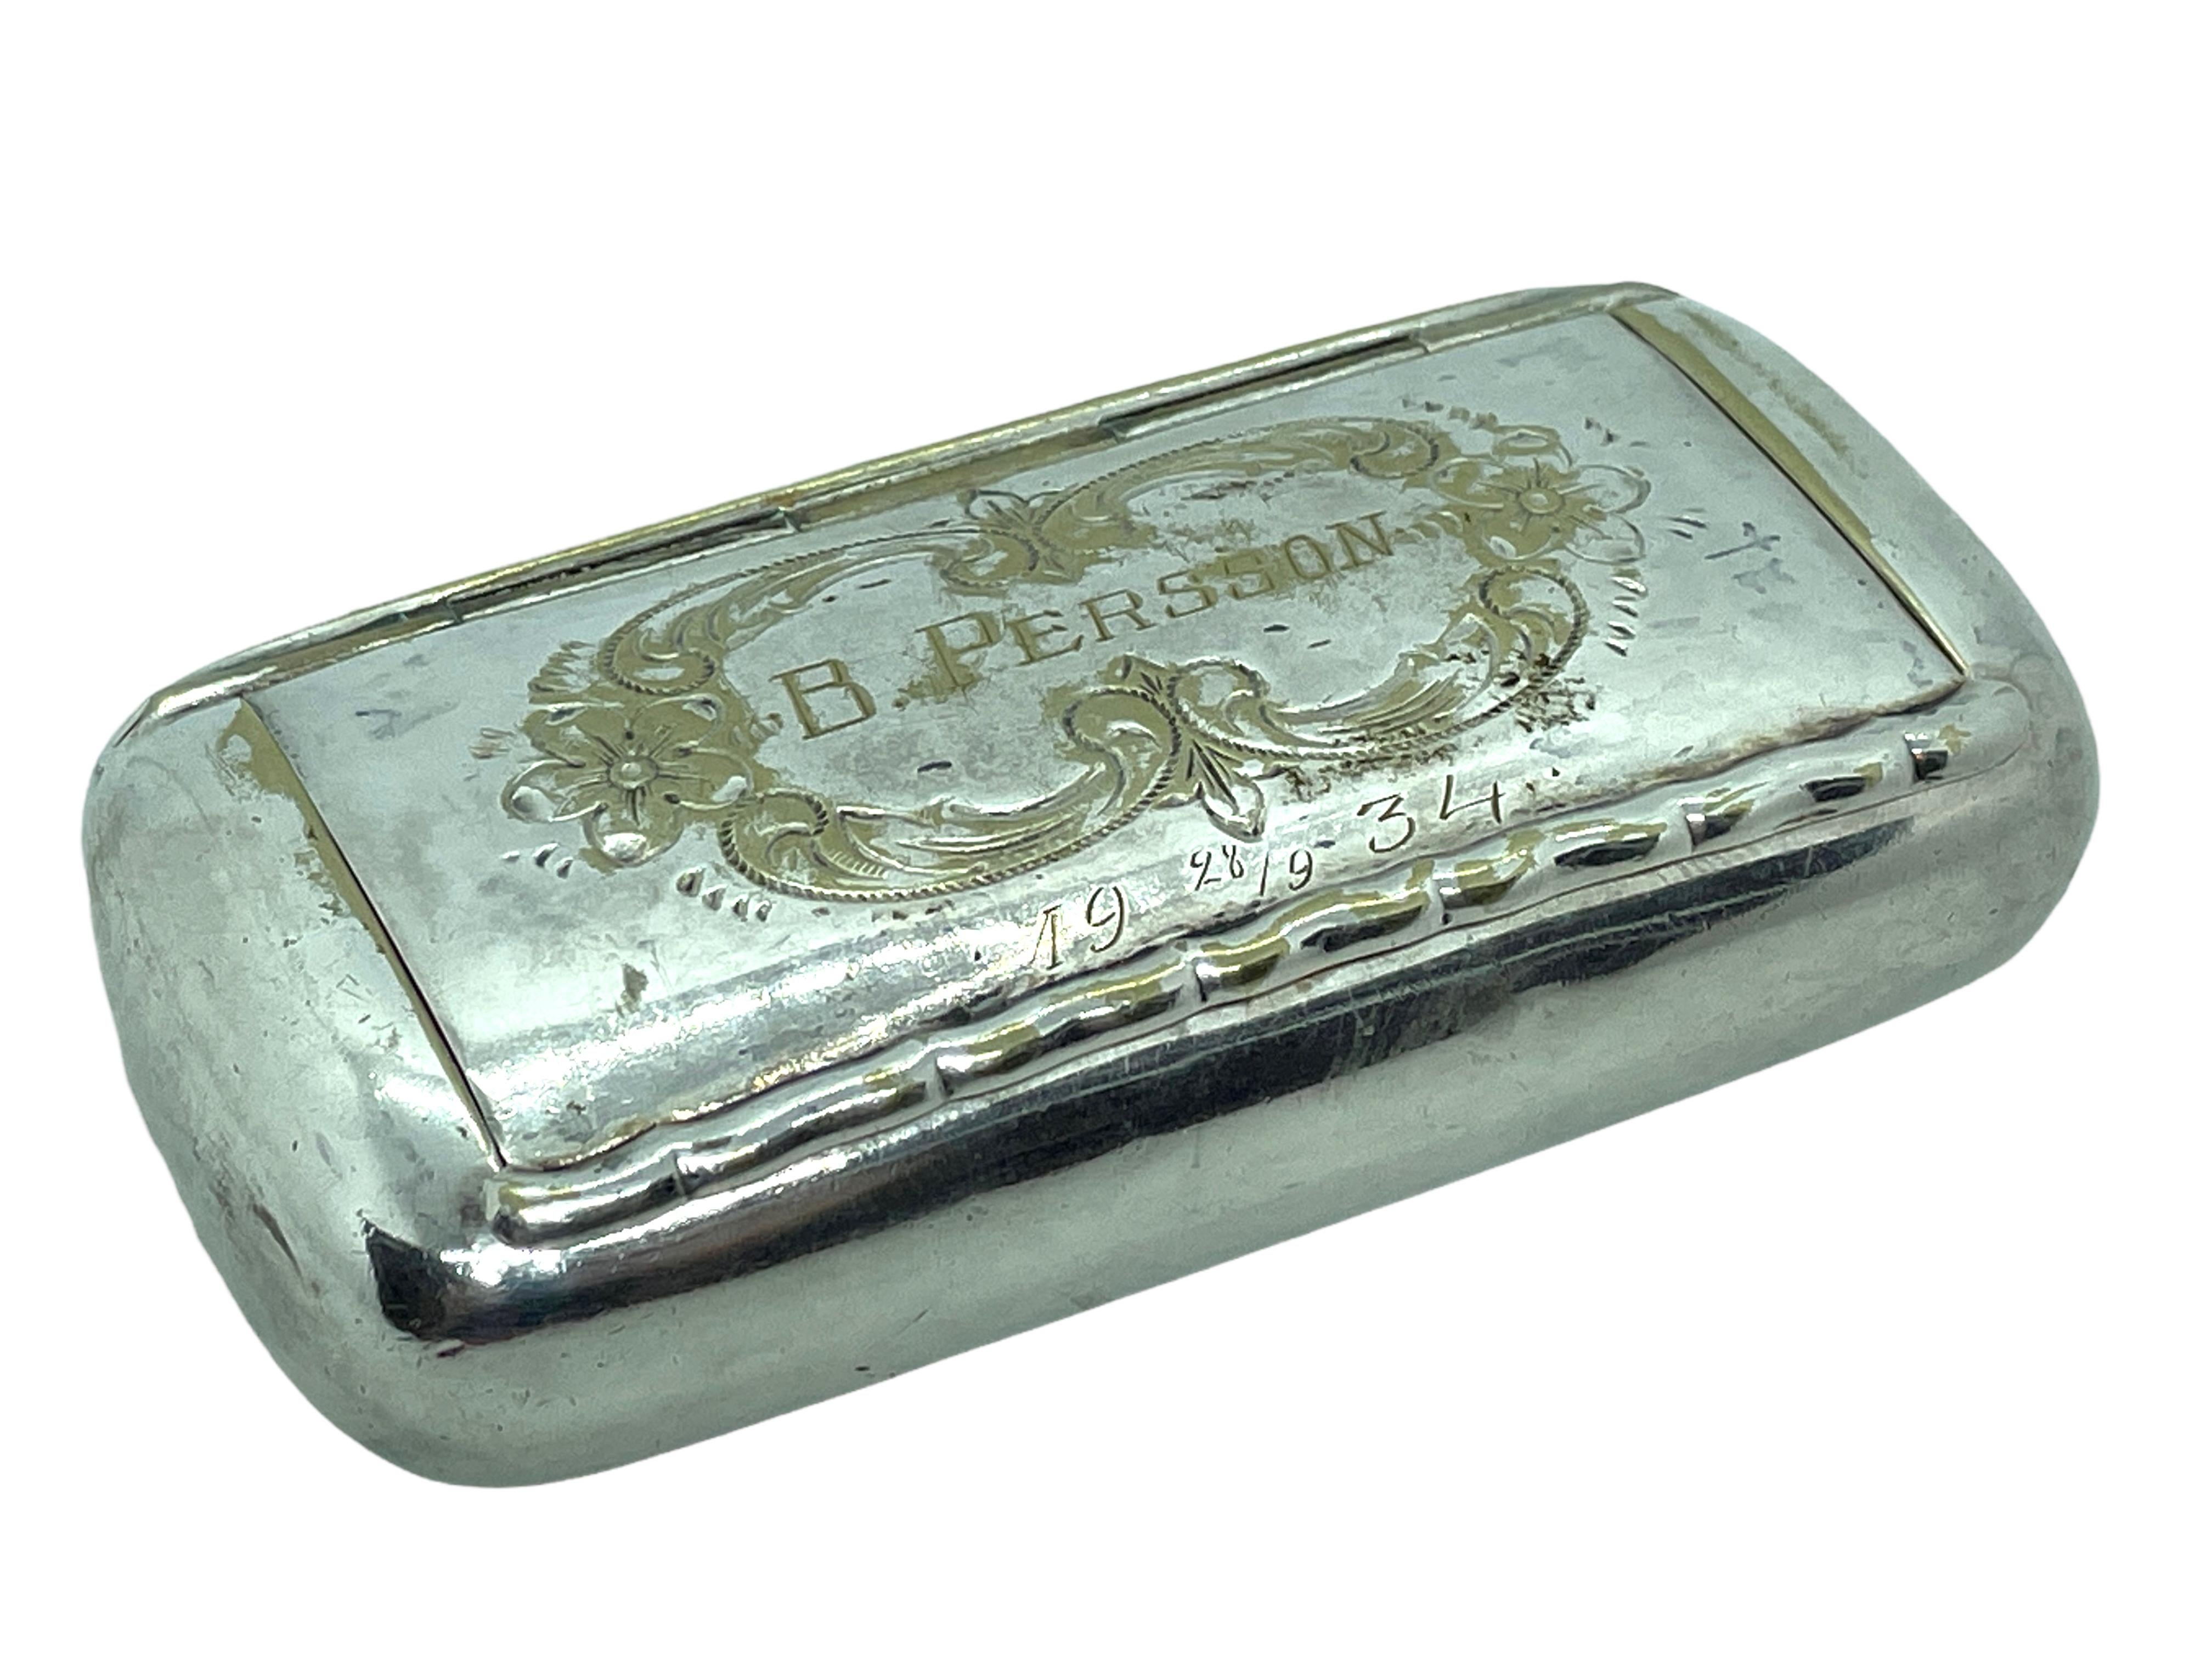 Beautiful snuff box engraved with Date 1934, made for B. Persson probably as a gift. Made of silver-plate alpaca, with nice patina. A nice addition in every man cave or just to display it on your cabinet.